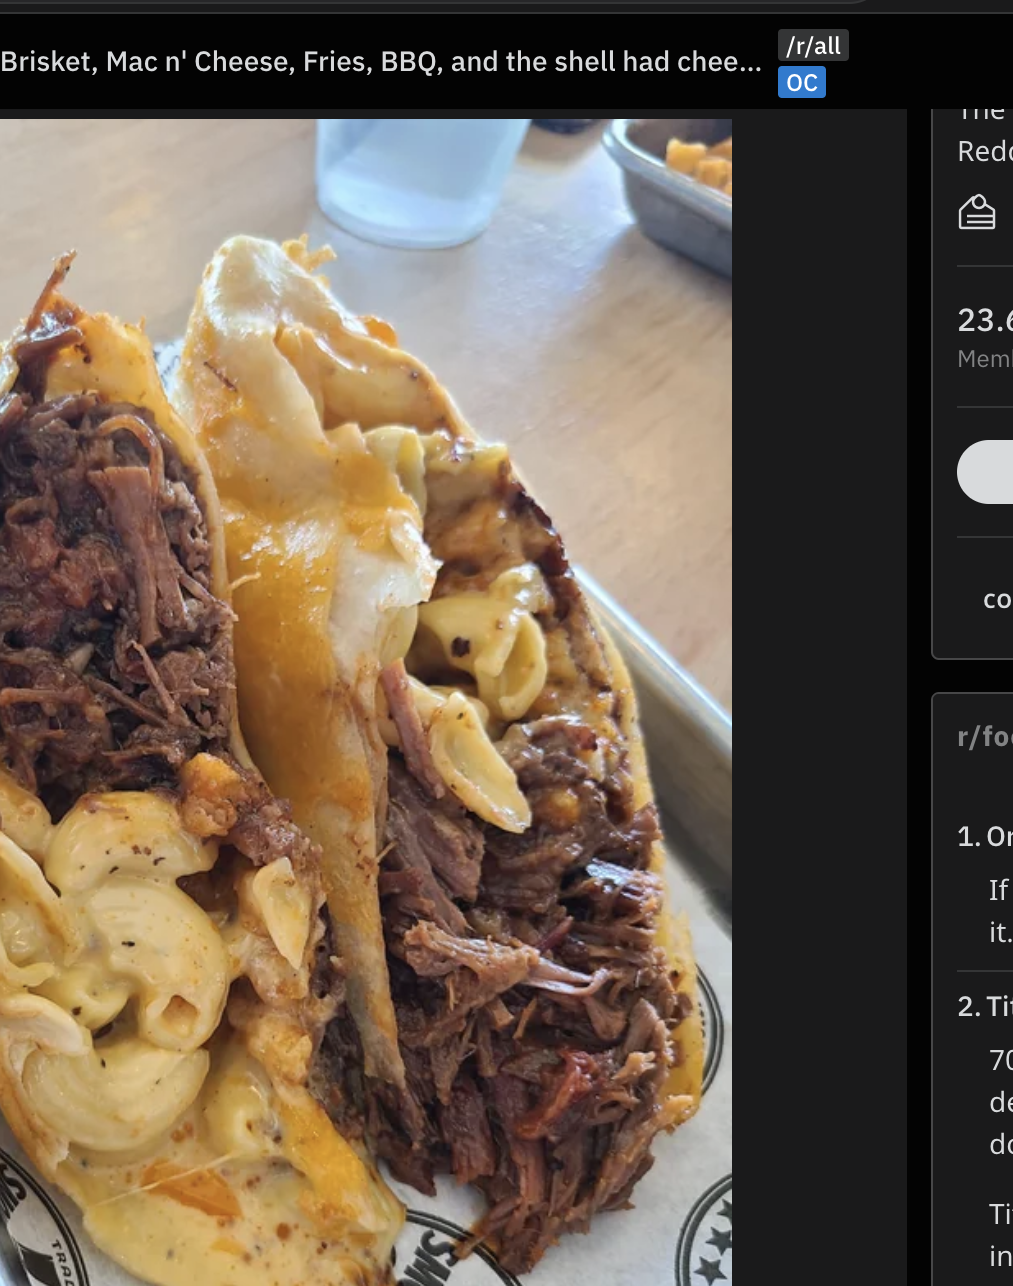 A taco shell is filled with mac and cheese and brisket